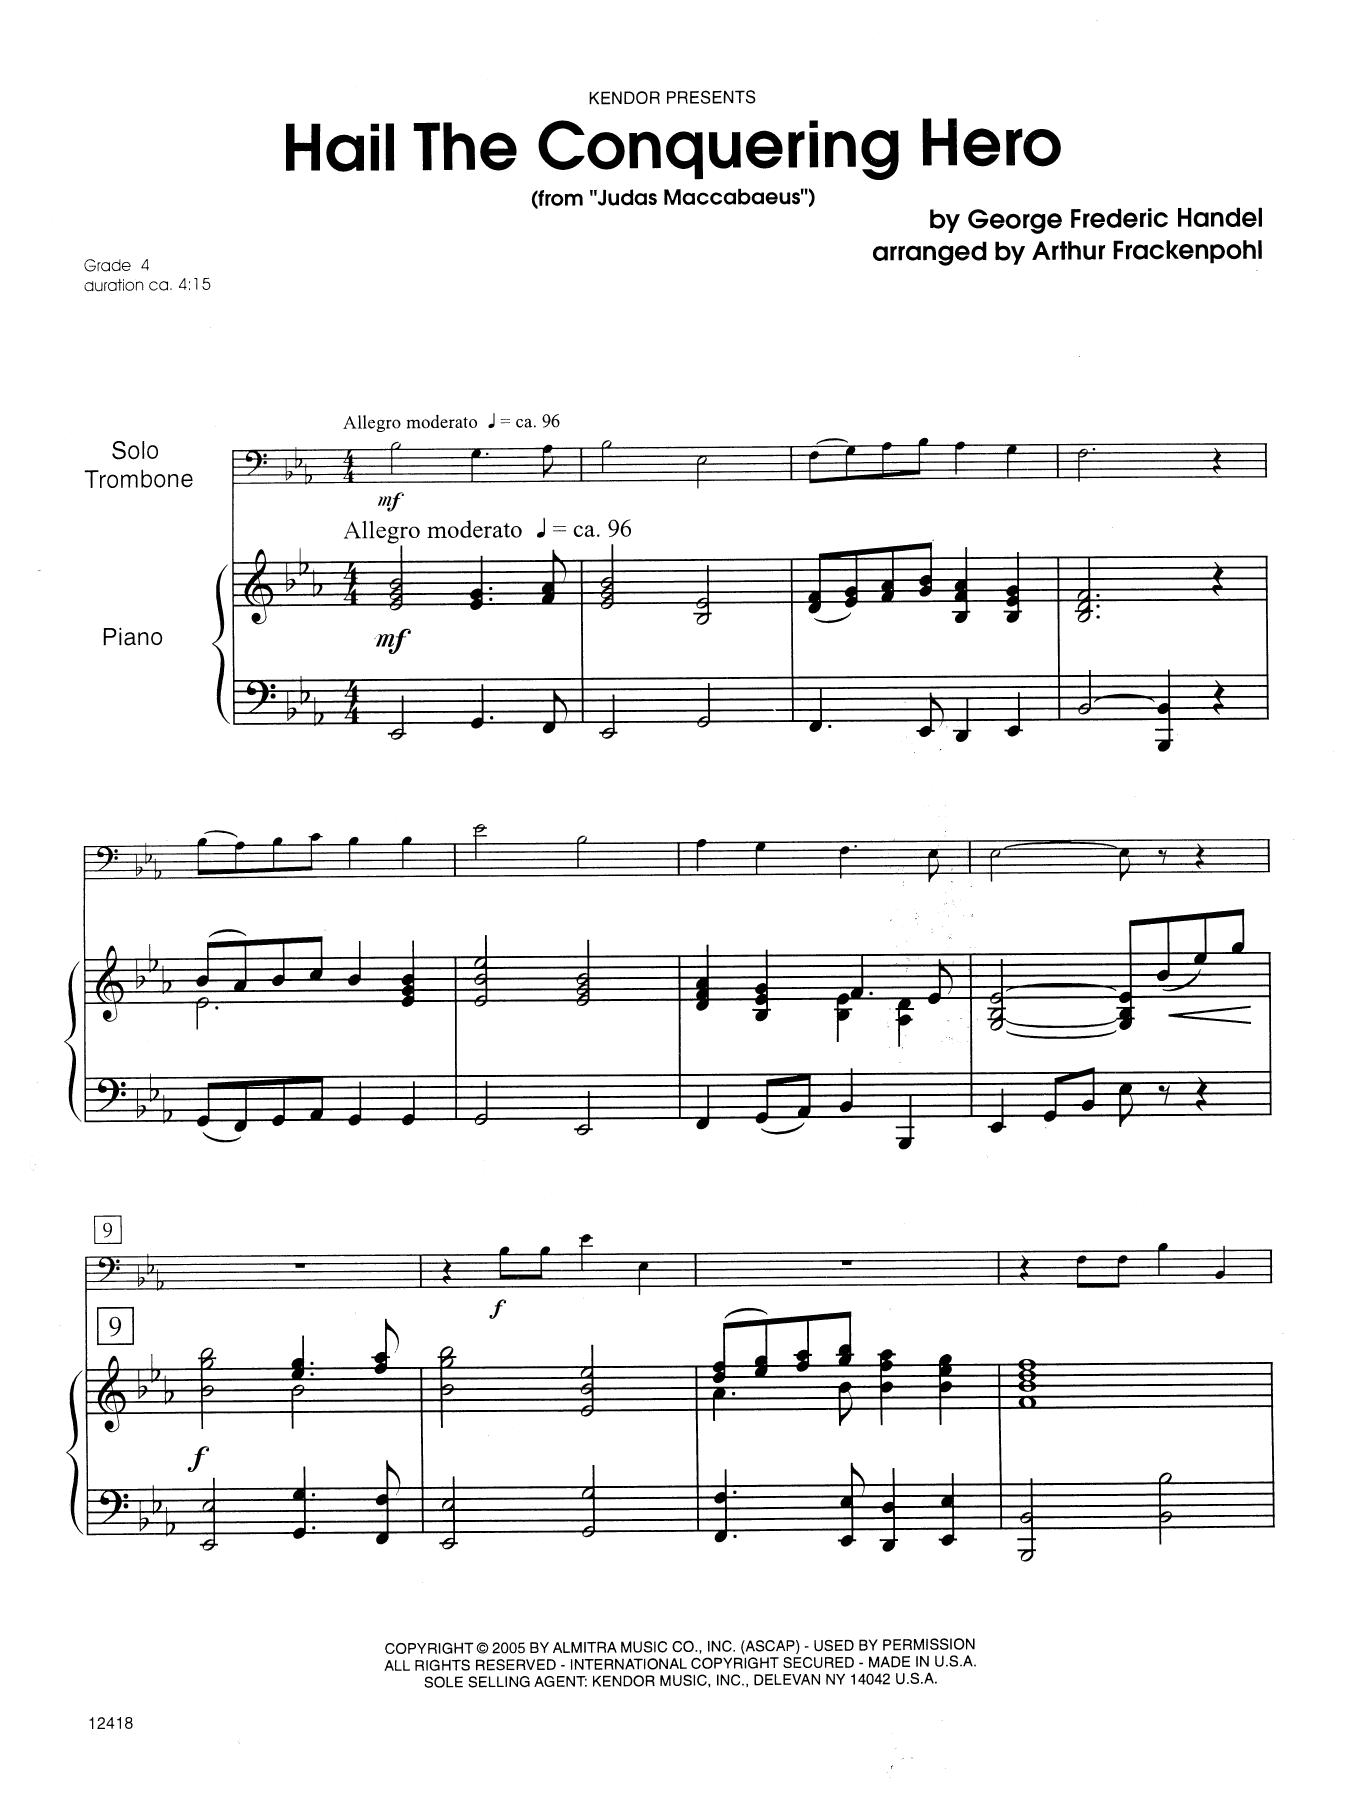 Download Frackenpohl Hail The Conquering Hero - Piano Sheet Music